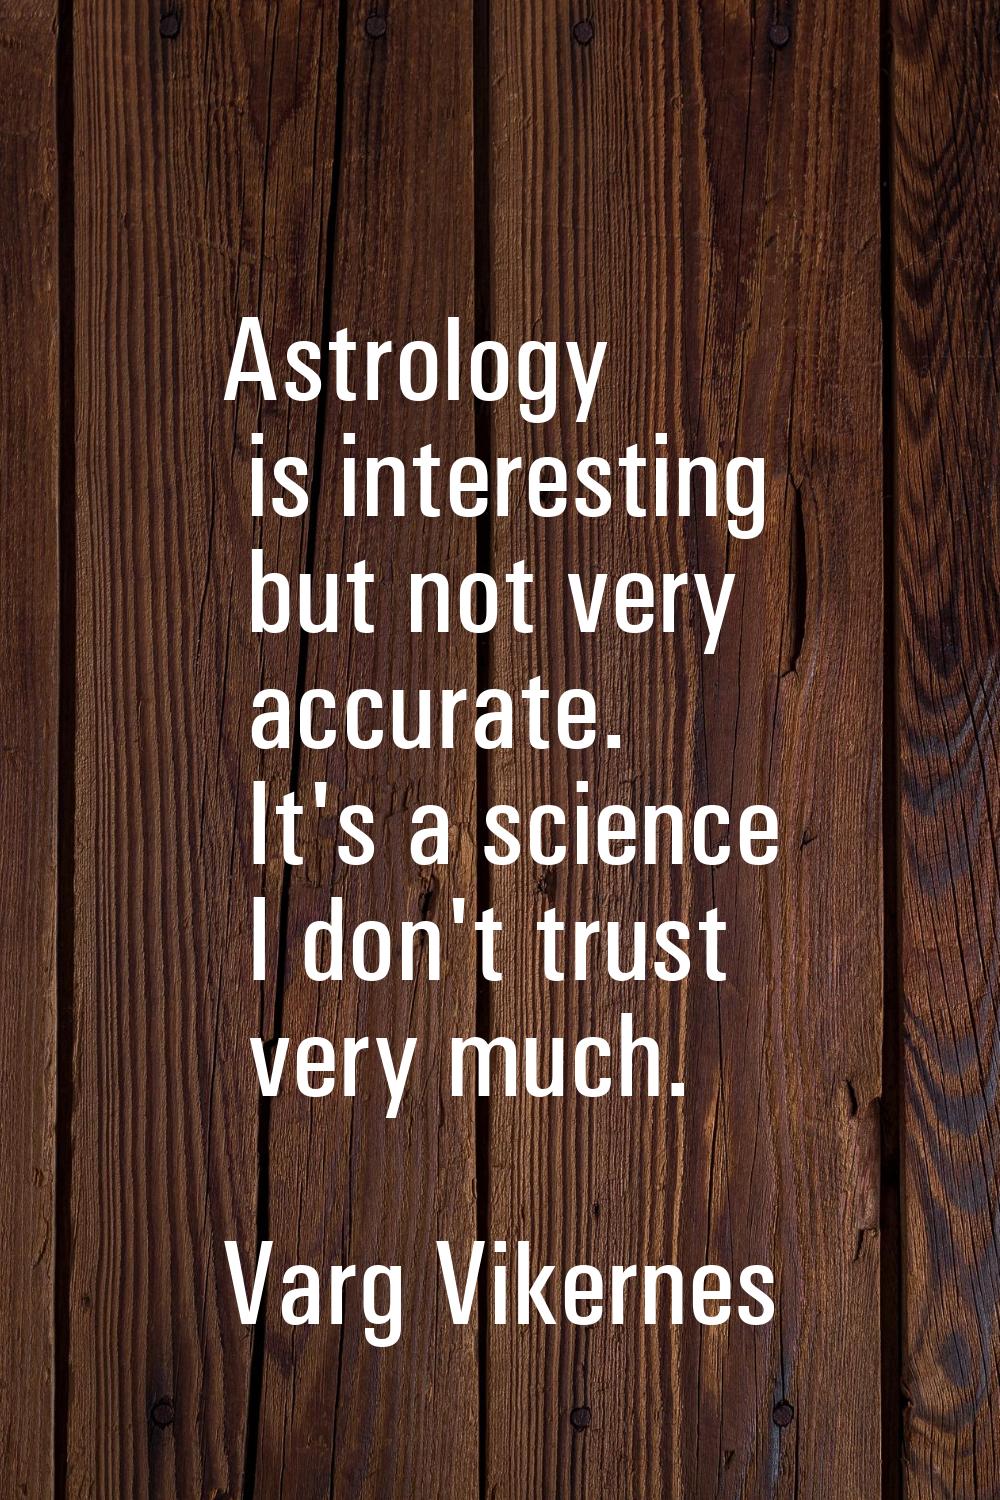 Astrology is interesting but not very accurate. It's a science I don't trust very much.